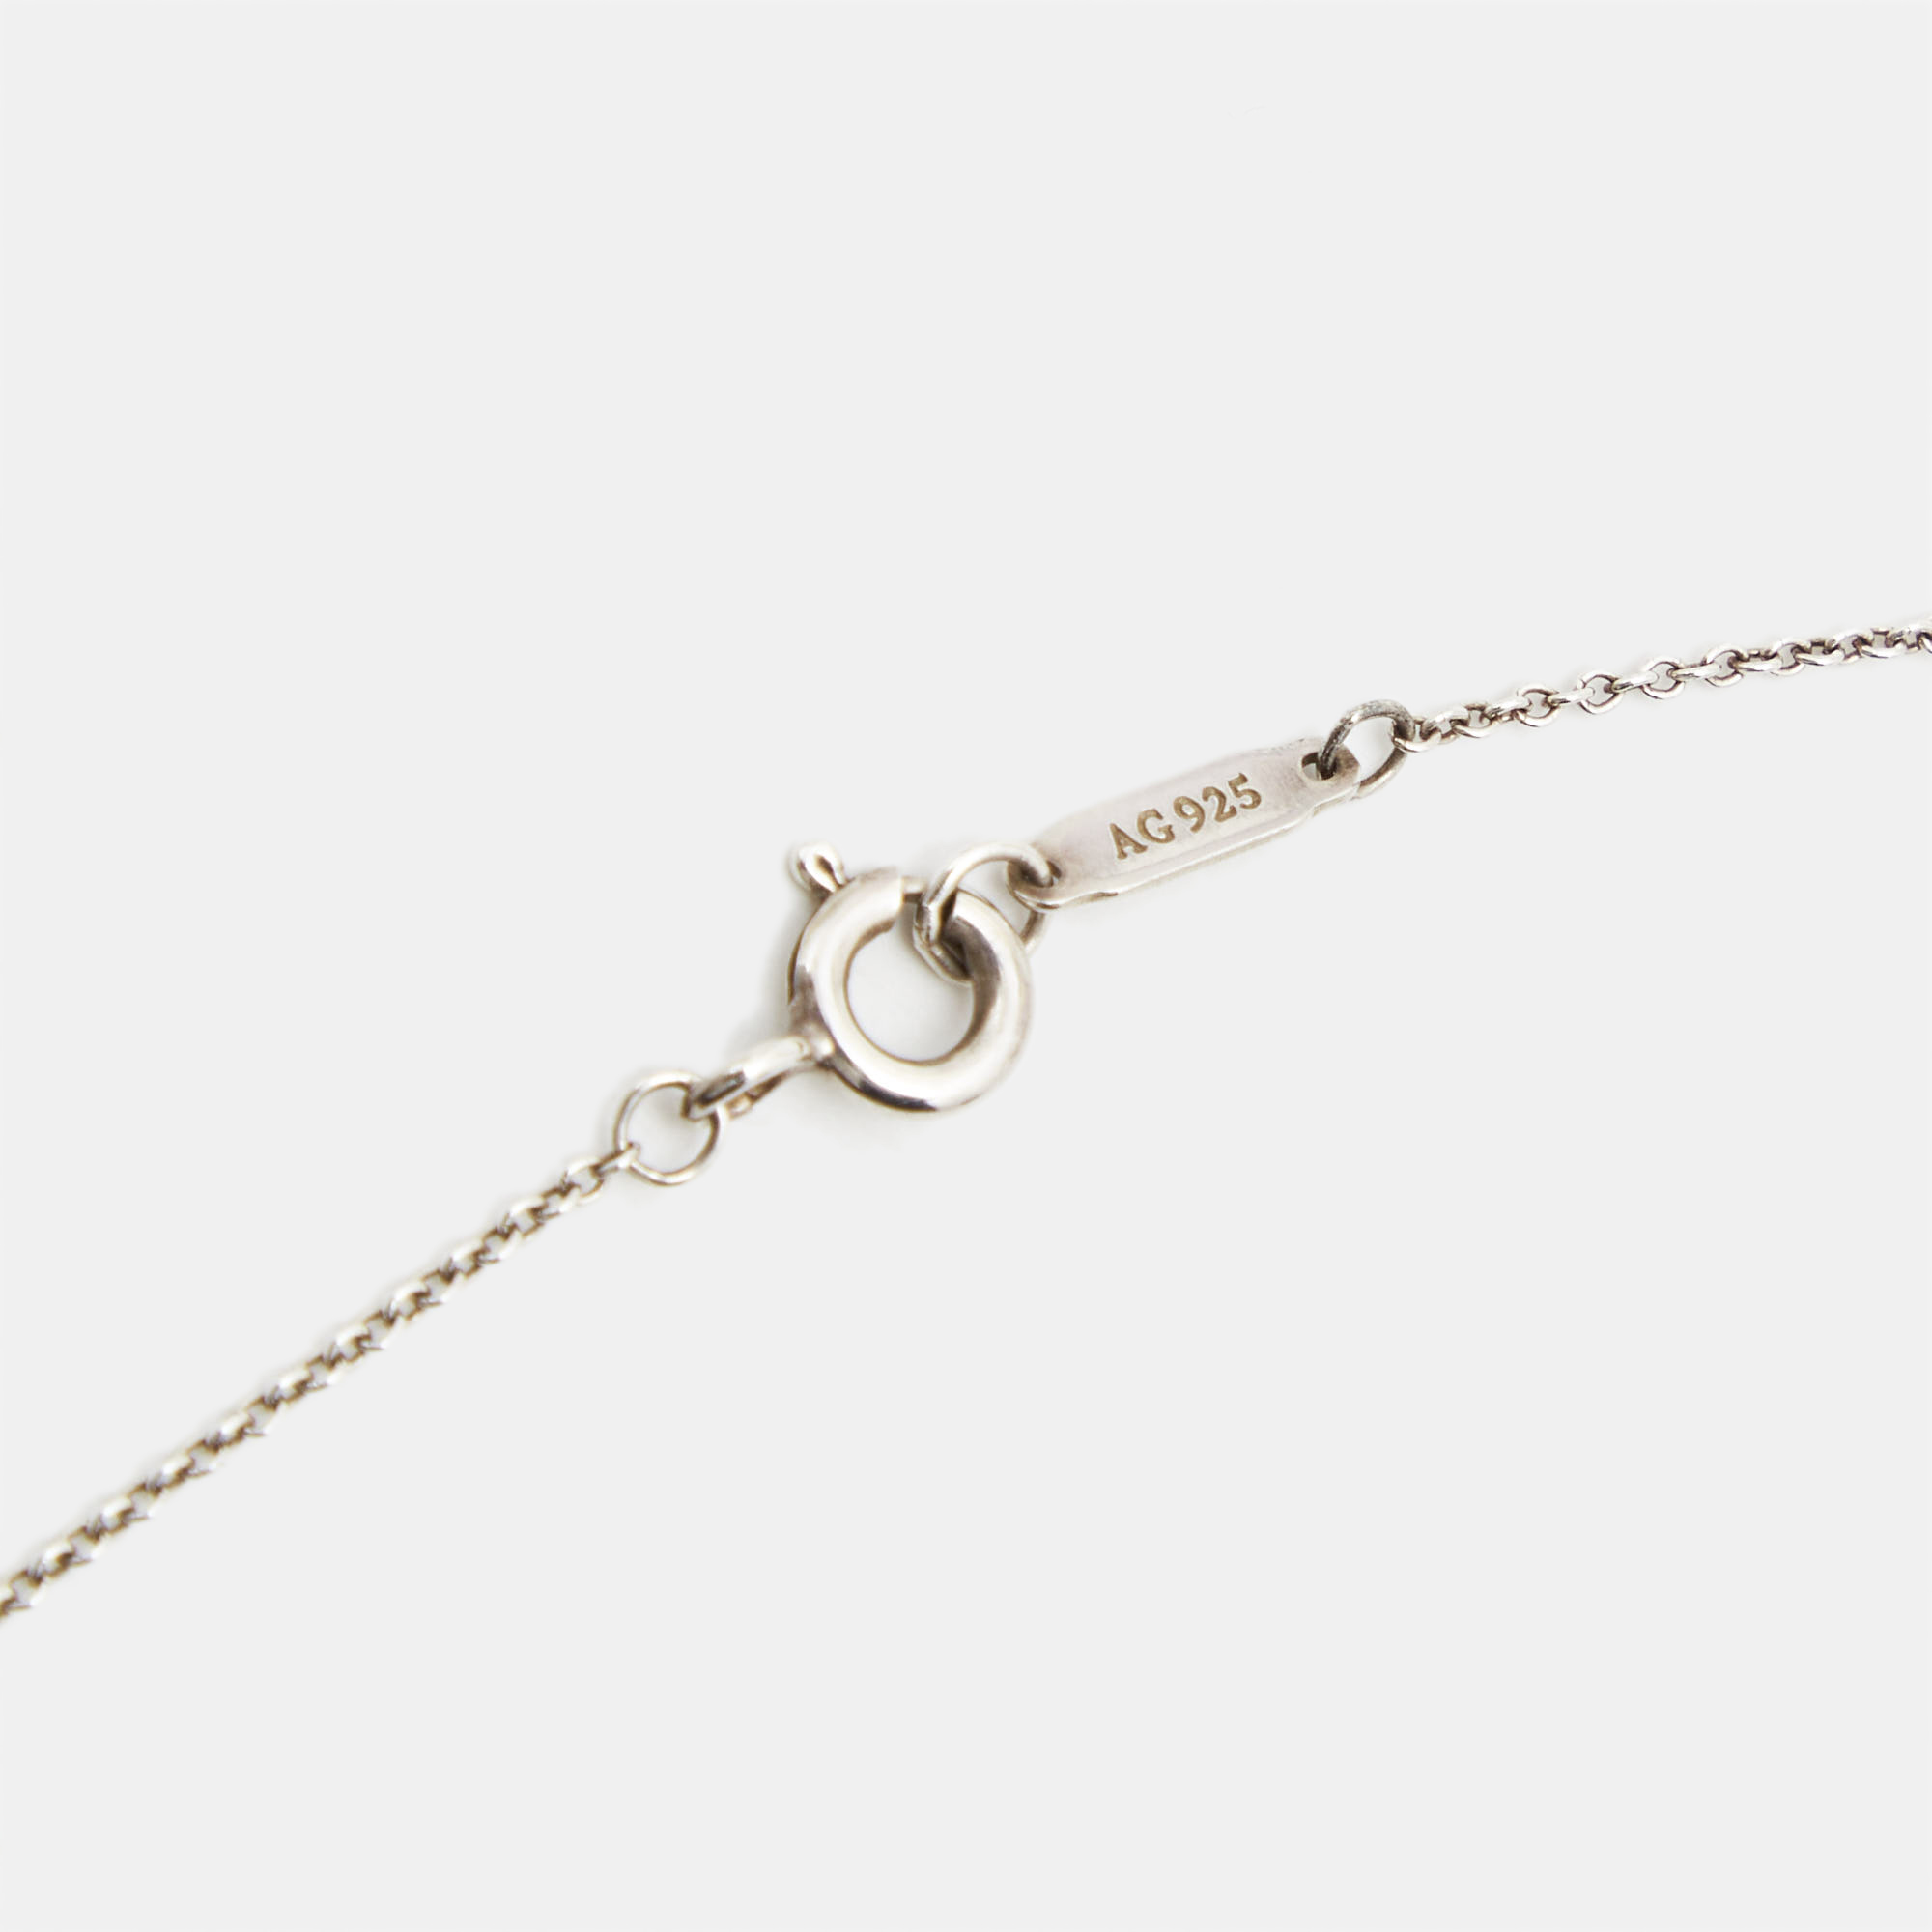 Tiffany & Co. Tiffany Notes Sterling Silver Pendant Necklace